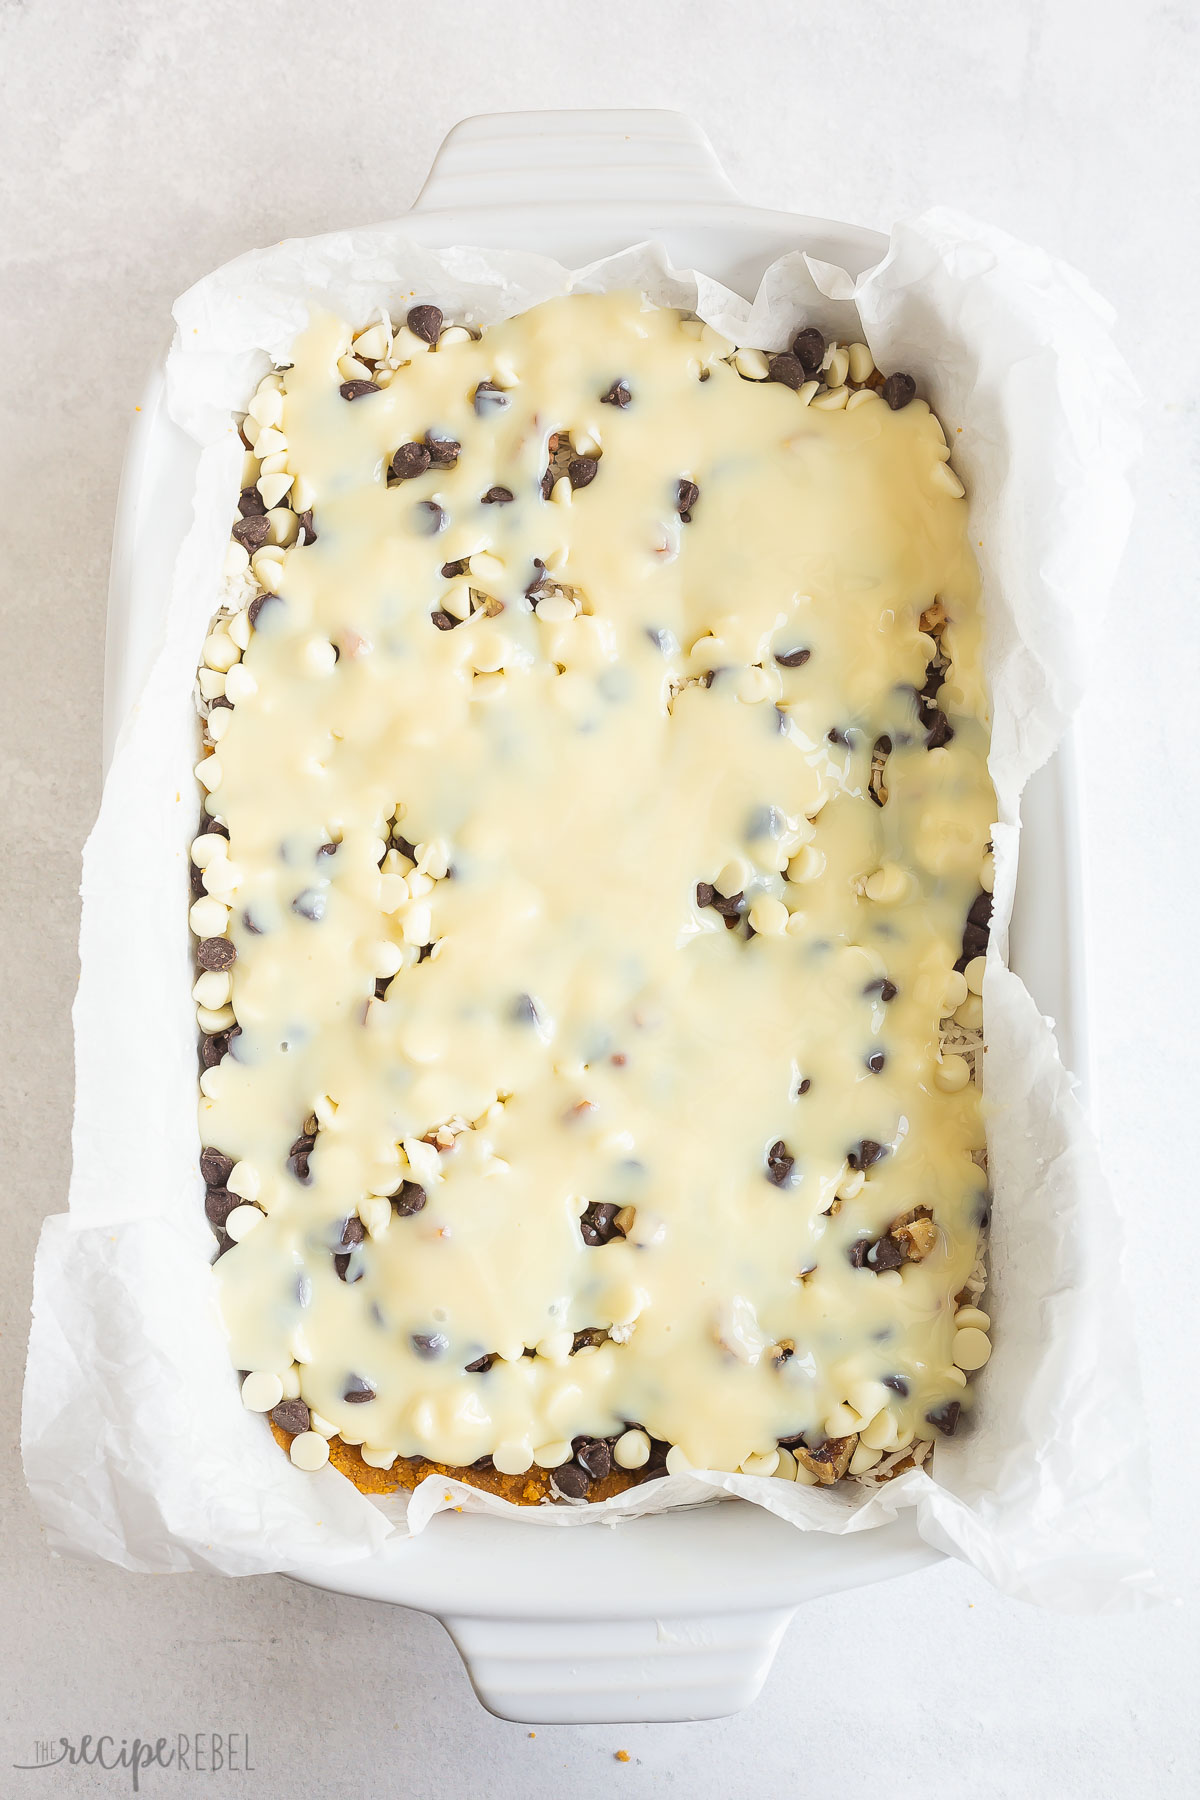 sweetened condensed milk poured over chocolate chips in baking dish.